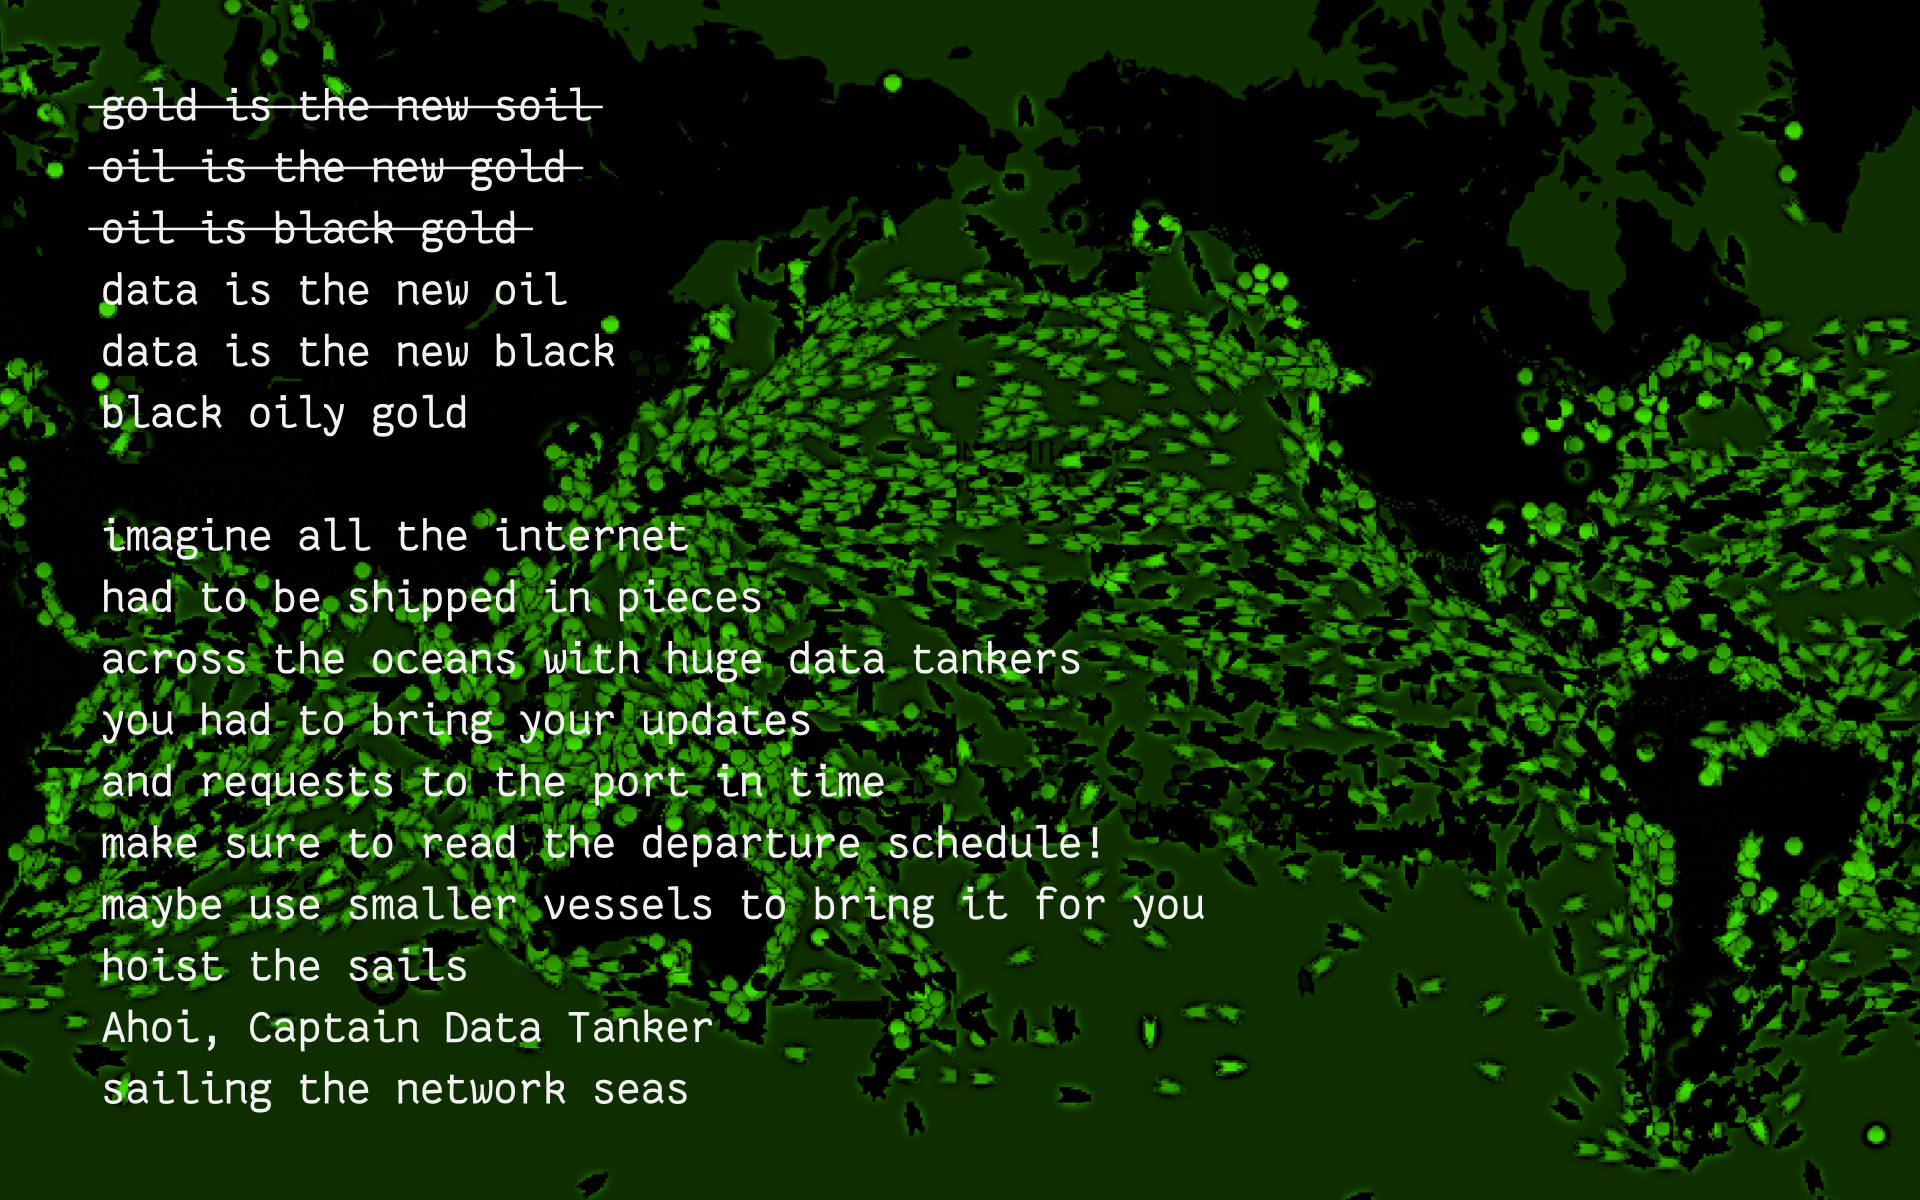 a green screenshot of a marine traffic worldmap with thousands of ships marked as little arrows, the text is written in a monospace white font on top